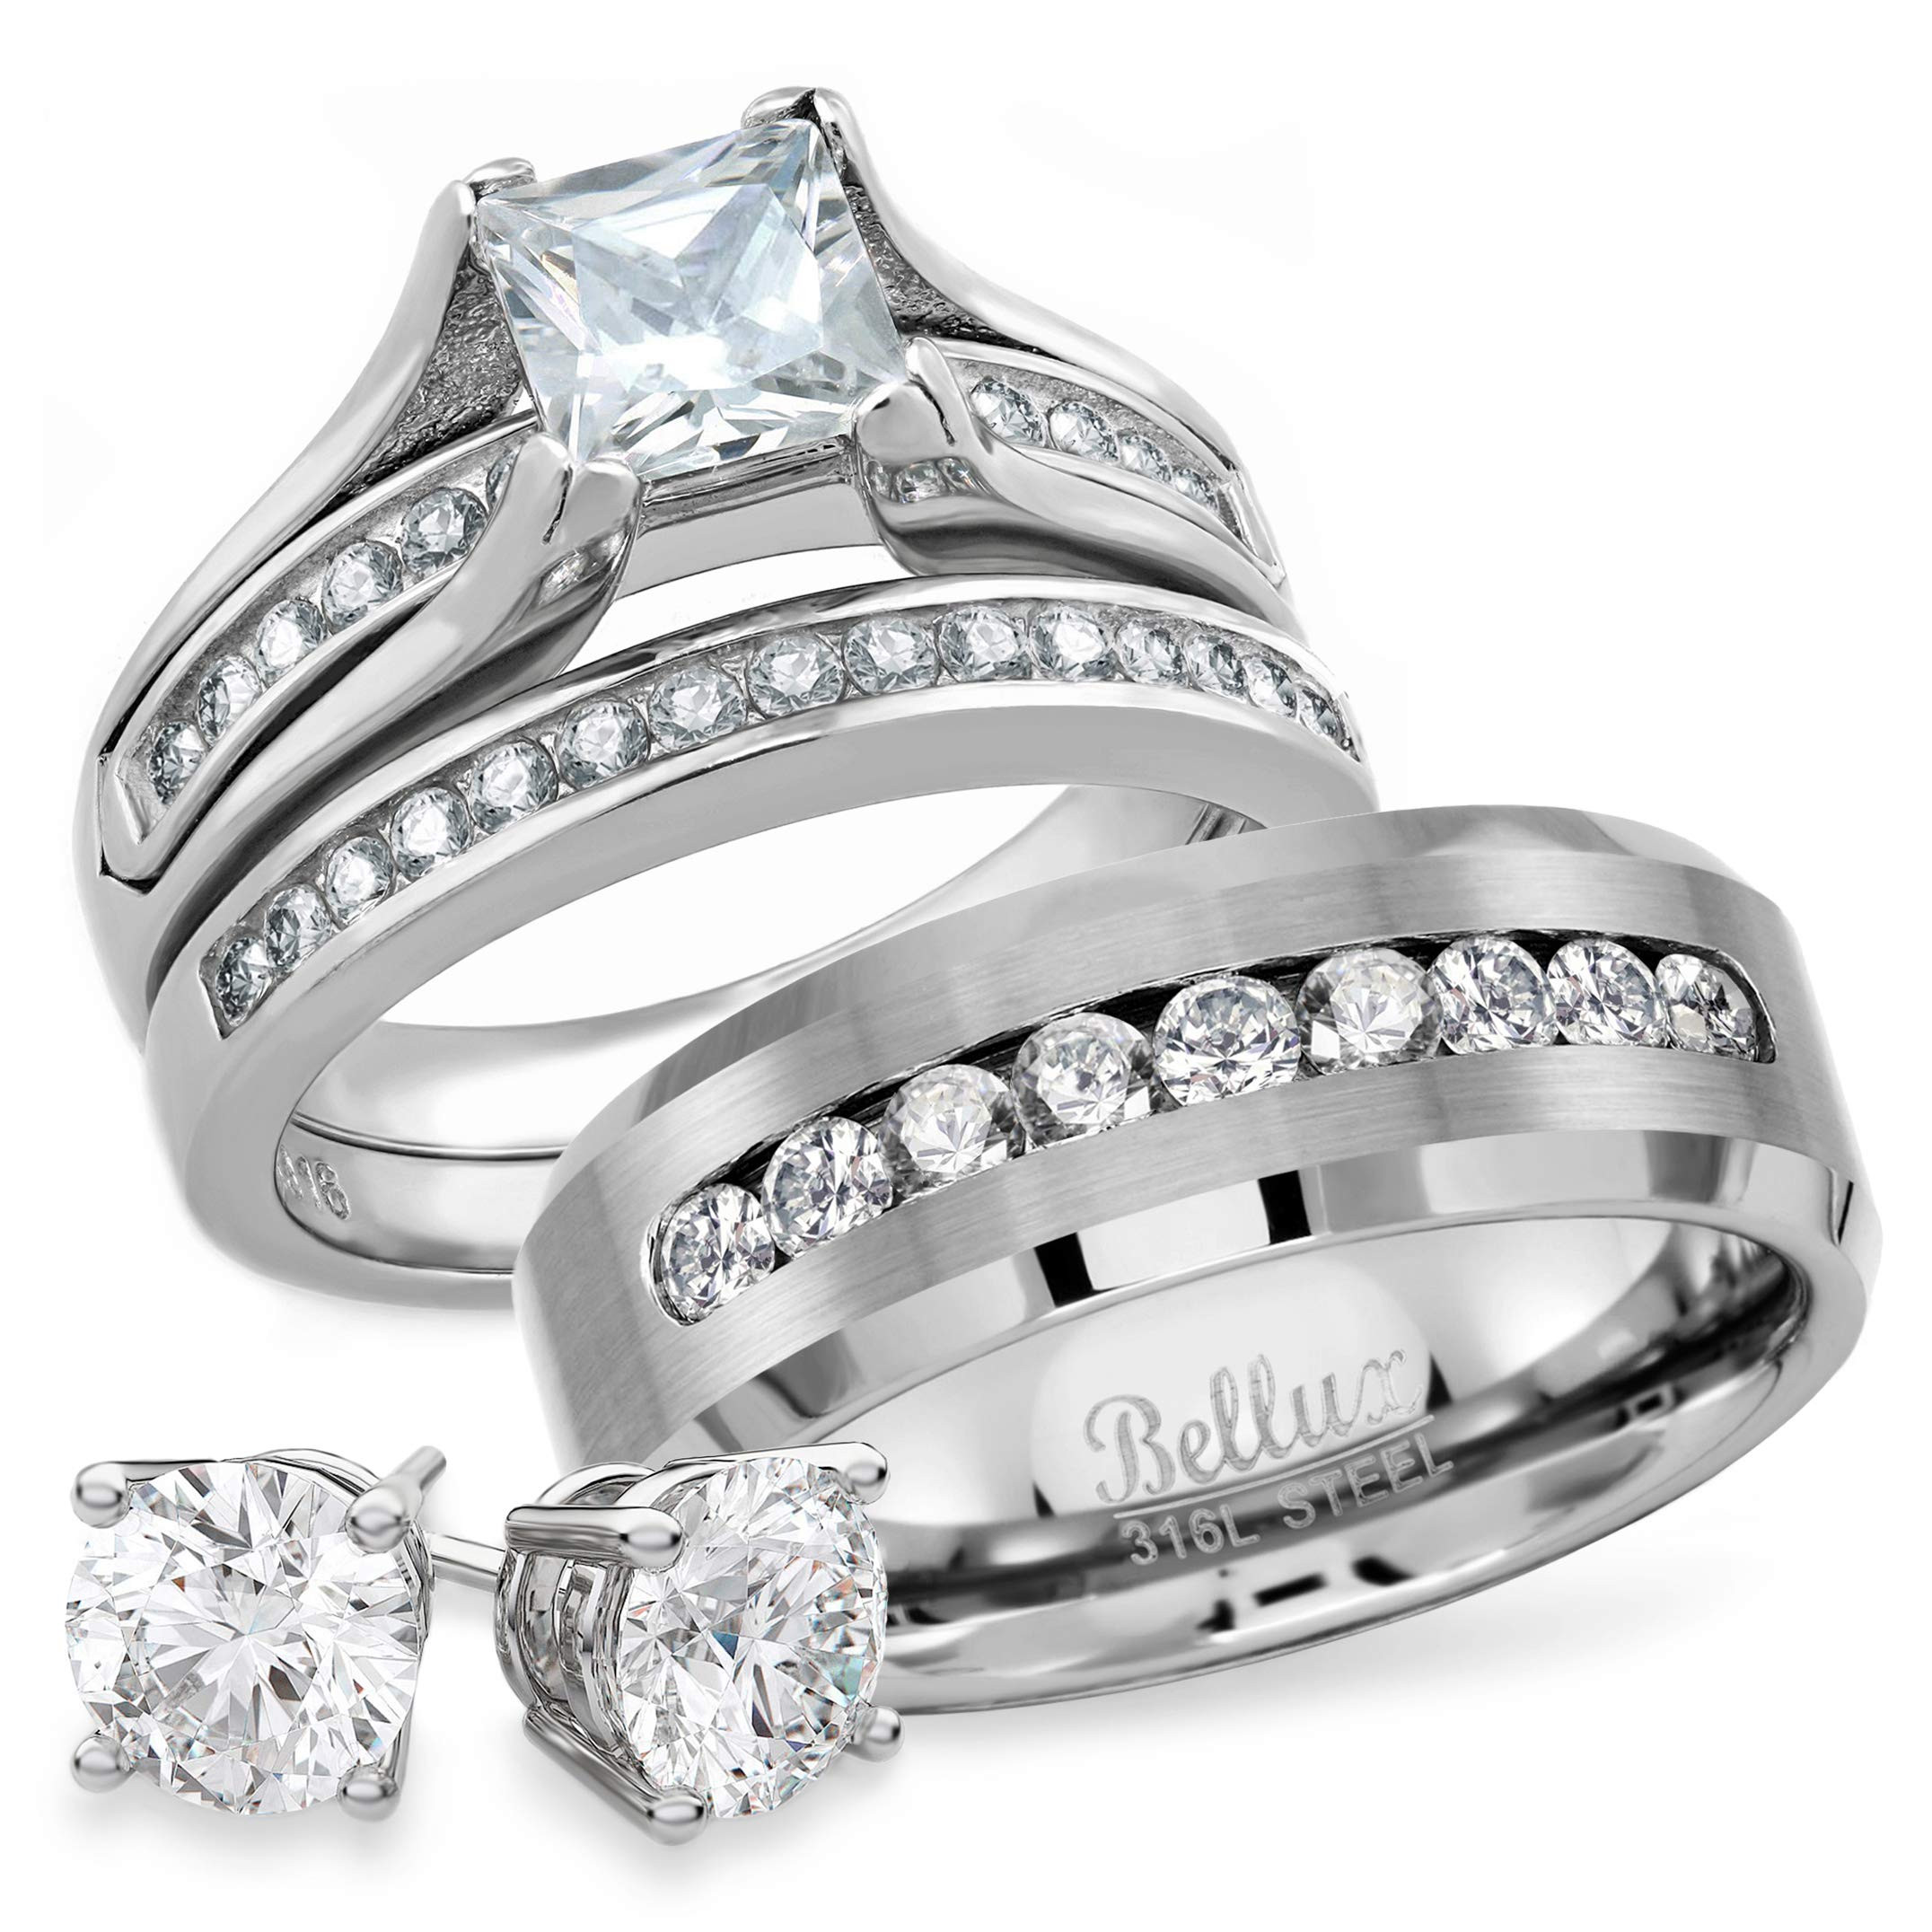 Wedding Rings Sets For Her
 Bellux Style His and Hers Wedding Rings Set for Him and